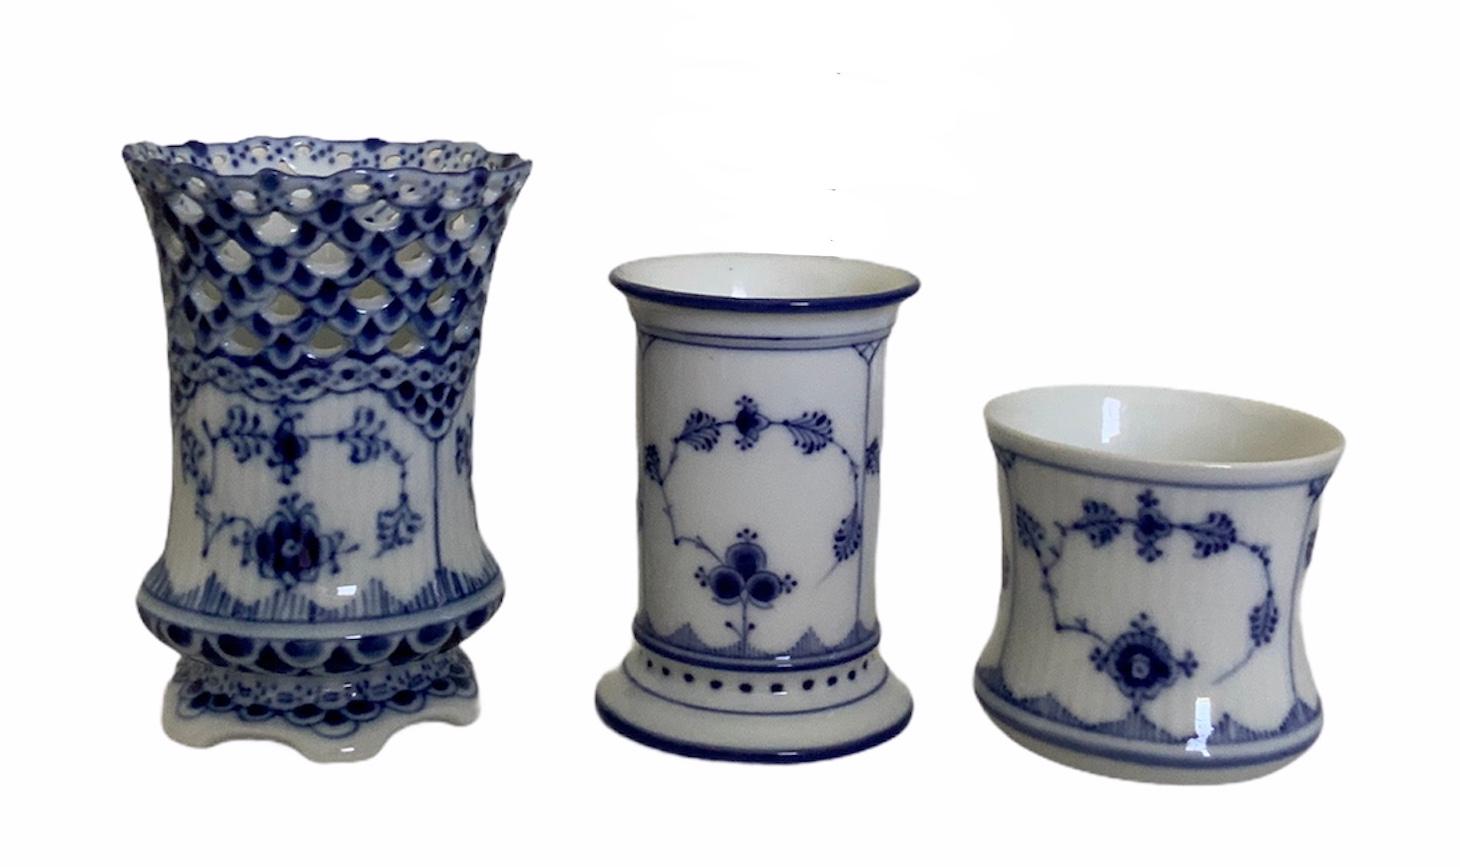 This is a set of three Royal Copenhagen hand painted fluted porcelain cigars or cigarettes cups/small vases. All of them are navy blue and white with a chinoiserie like pattern design of a creeper of flowers in the center. The largest one has a